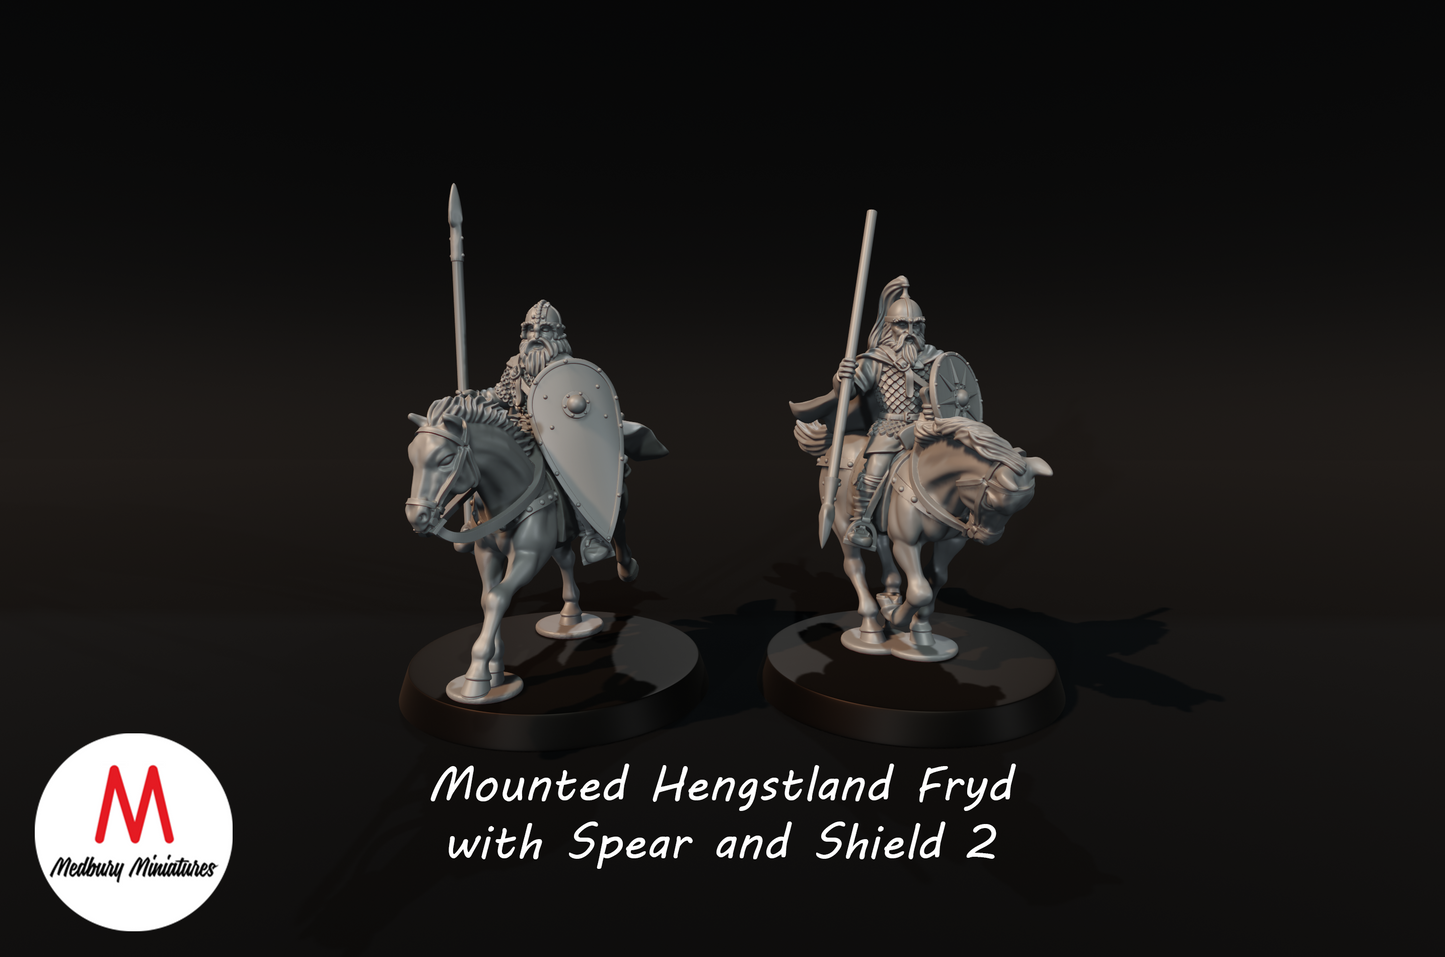 Mounted Hengstland Fryd with Spear and Shield 2